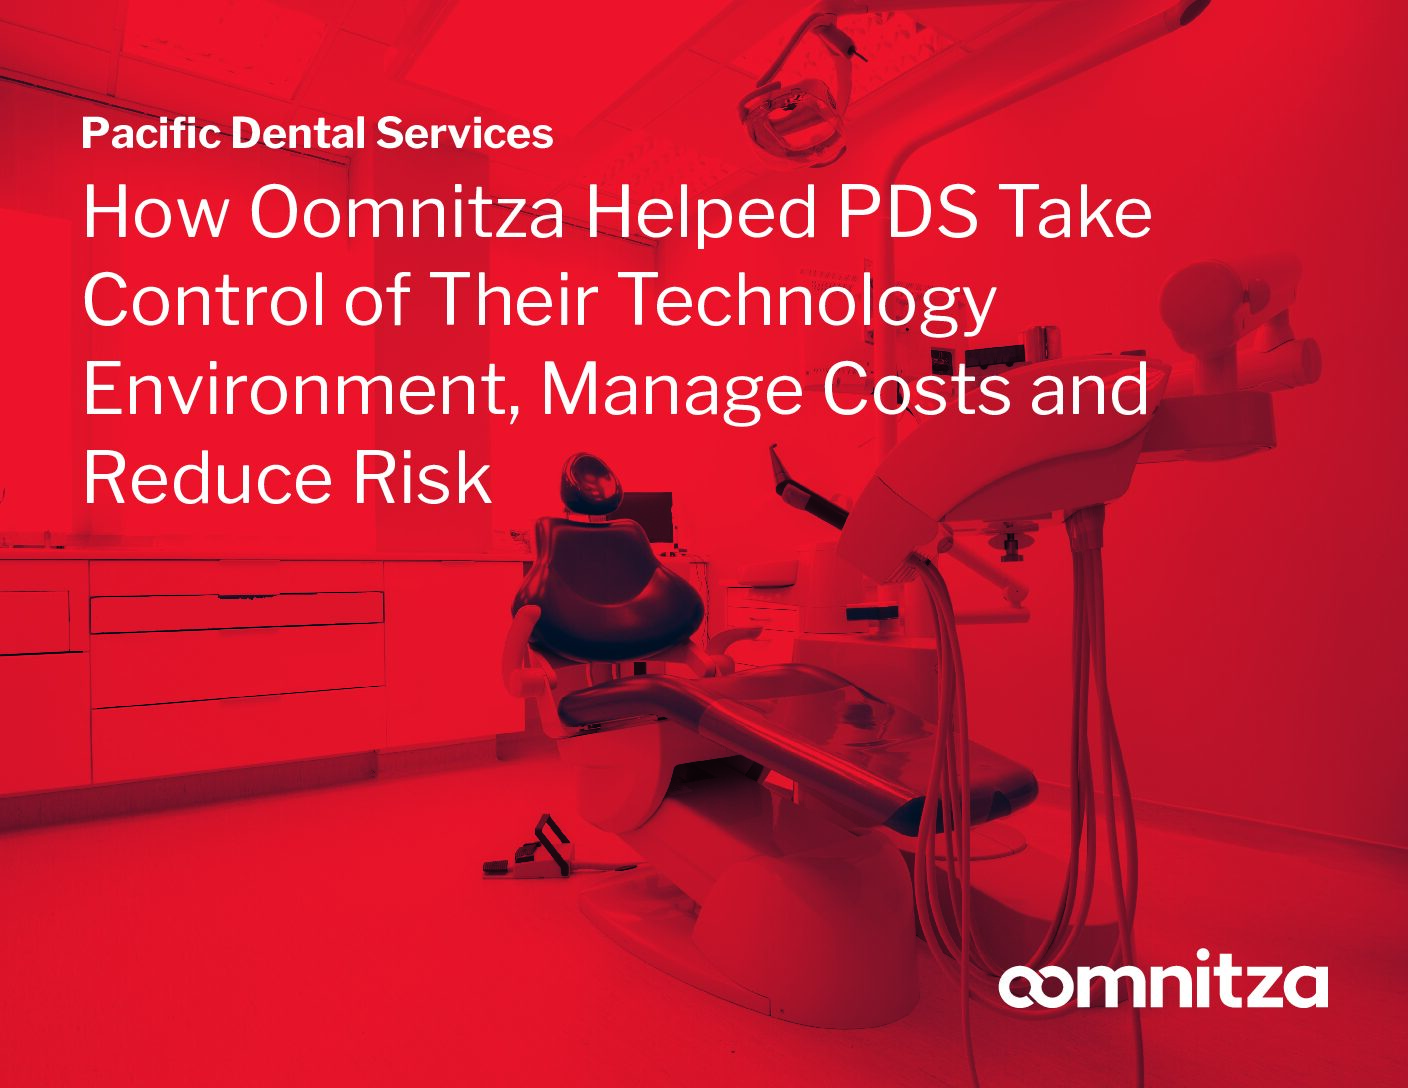 Featured image for Pacific Dental Services: How Oomnitza Helped PDS Take Control of Their Technology Environment, Manage Costs and Reduce Risk